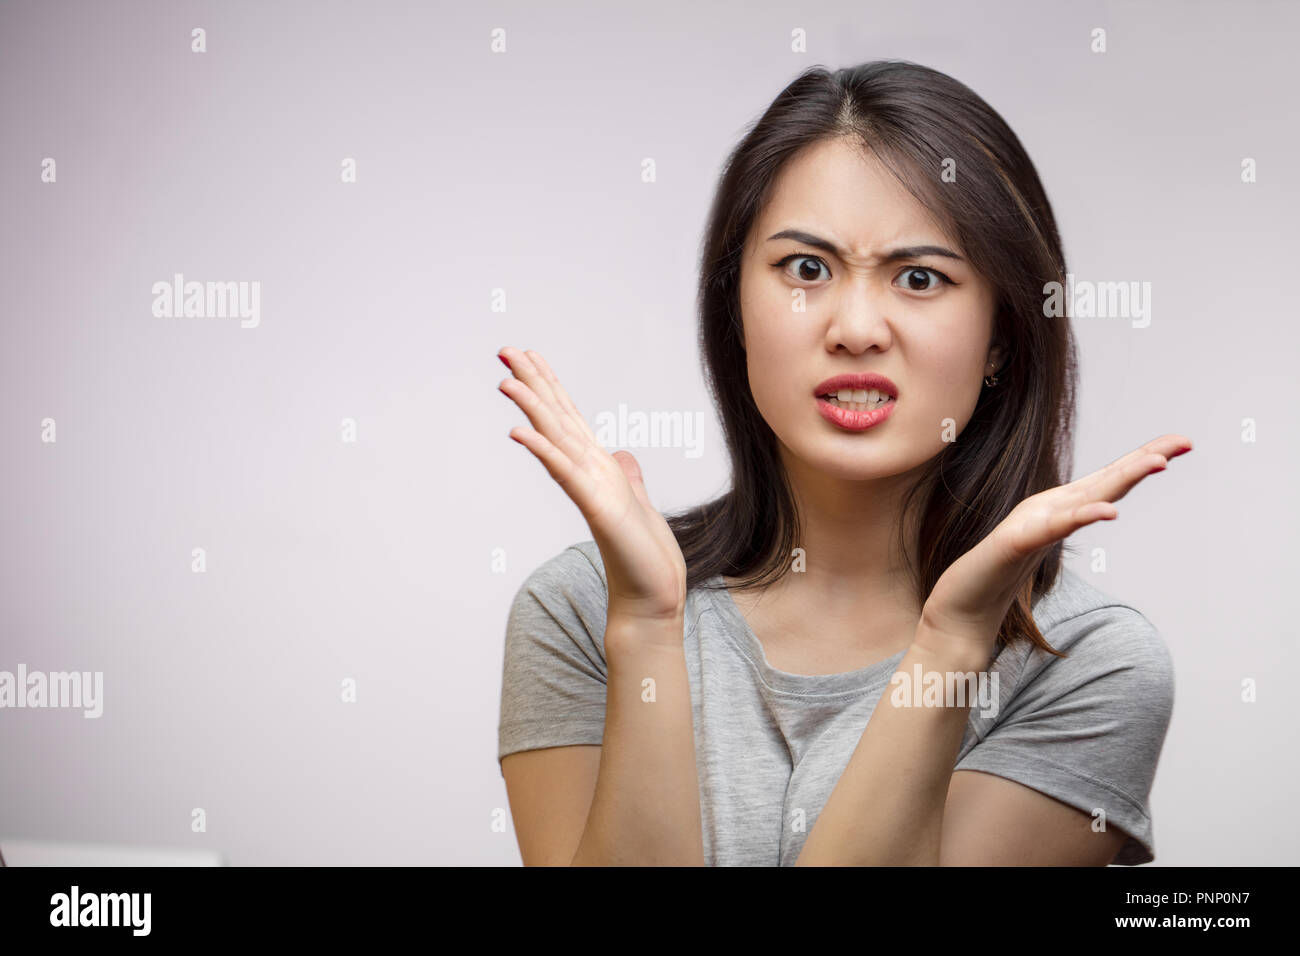 Frustrated Angry Asian woman isolated over white background image